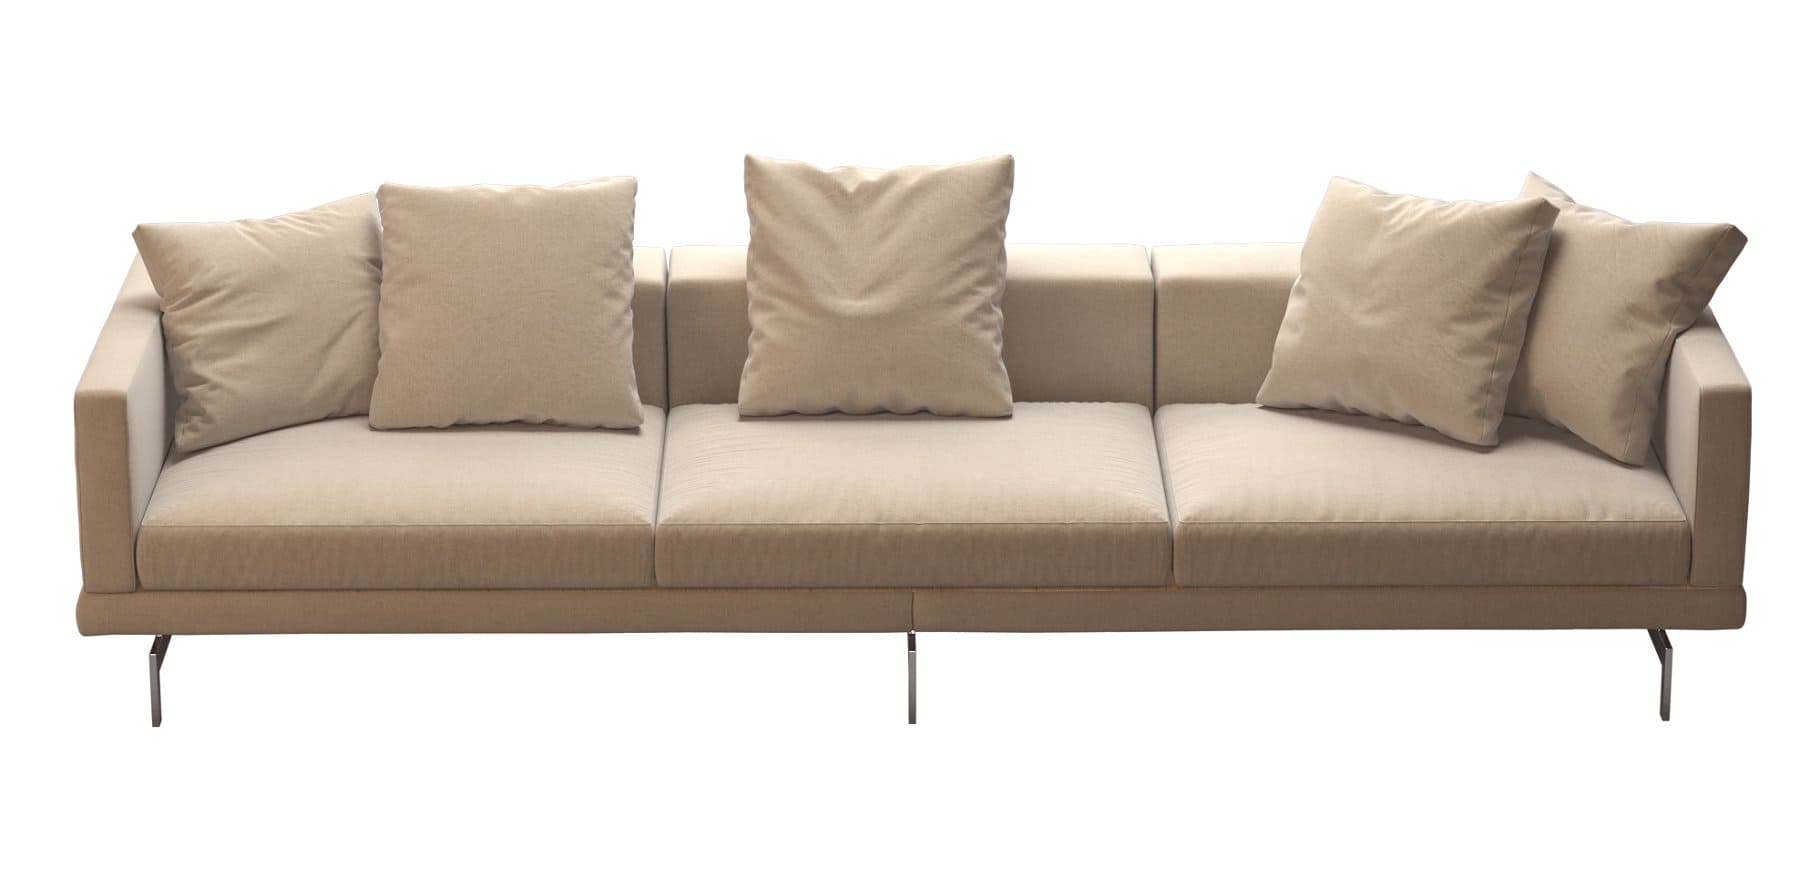 Large beige dock sofa from bb italia, top view.